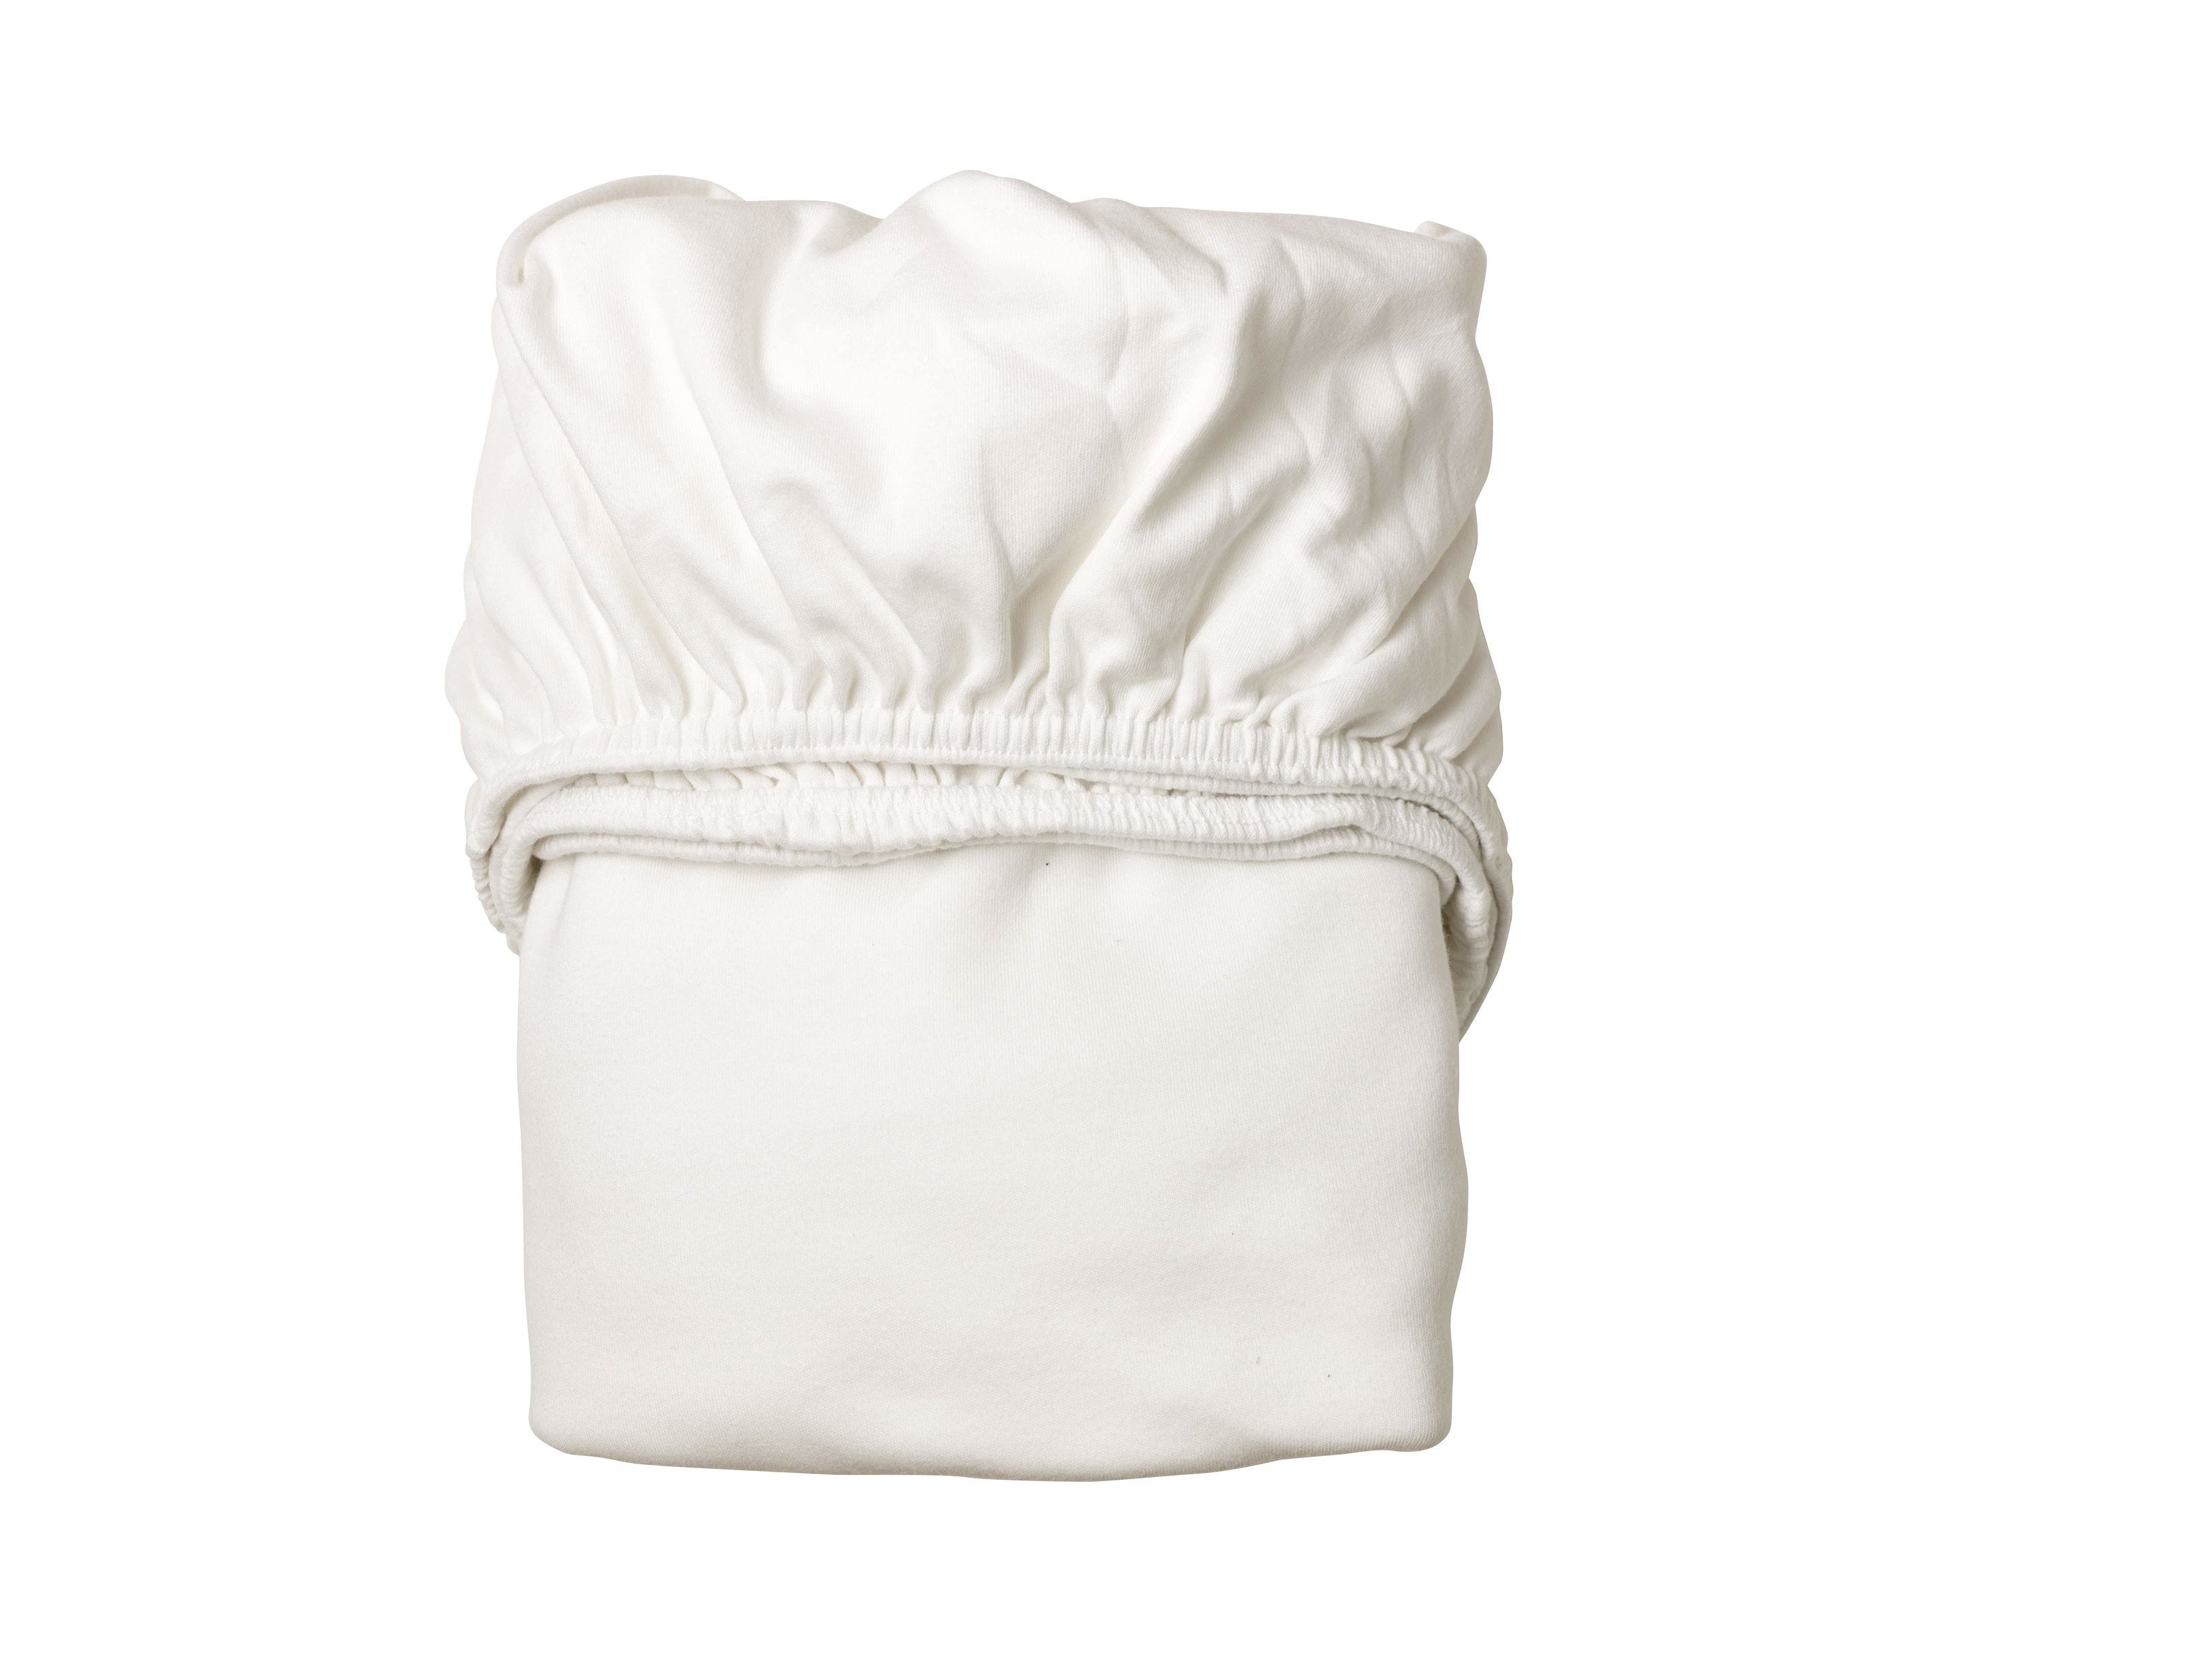 Fitted Sheet for Junior - Set of 2